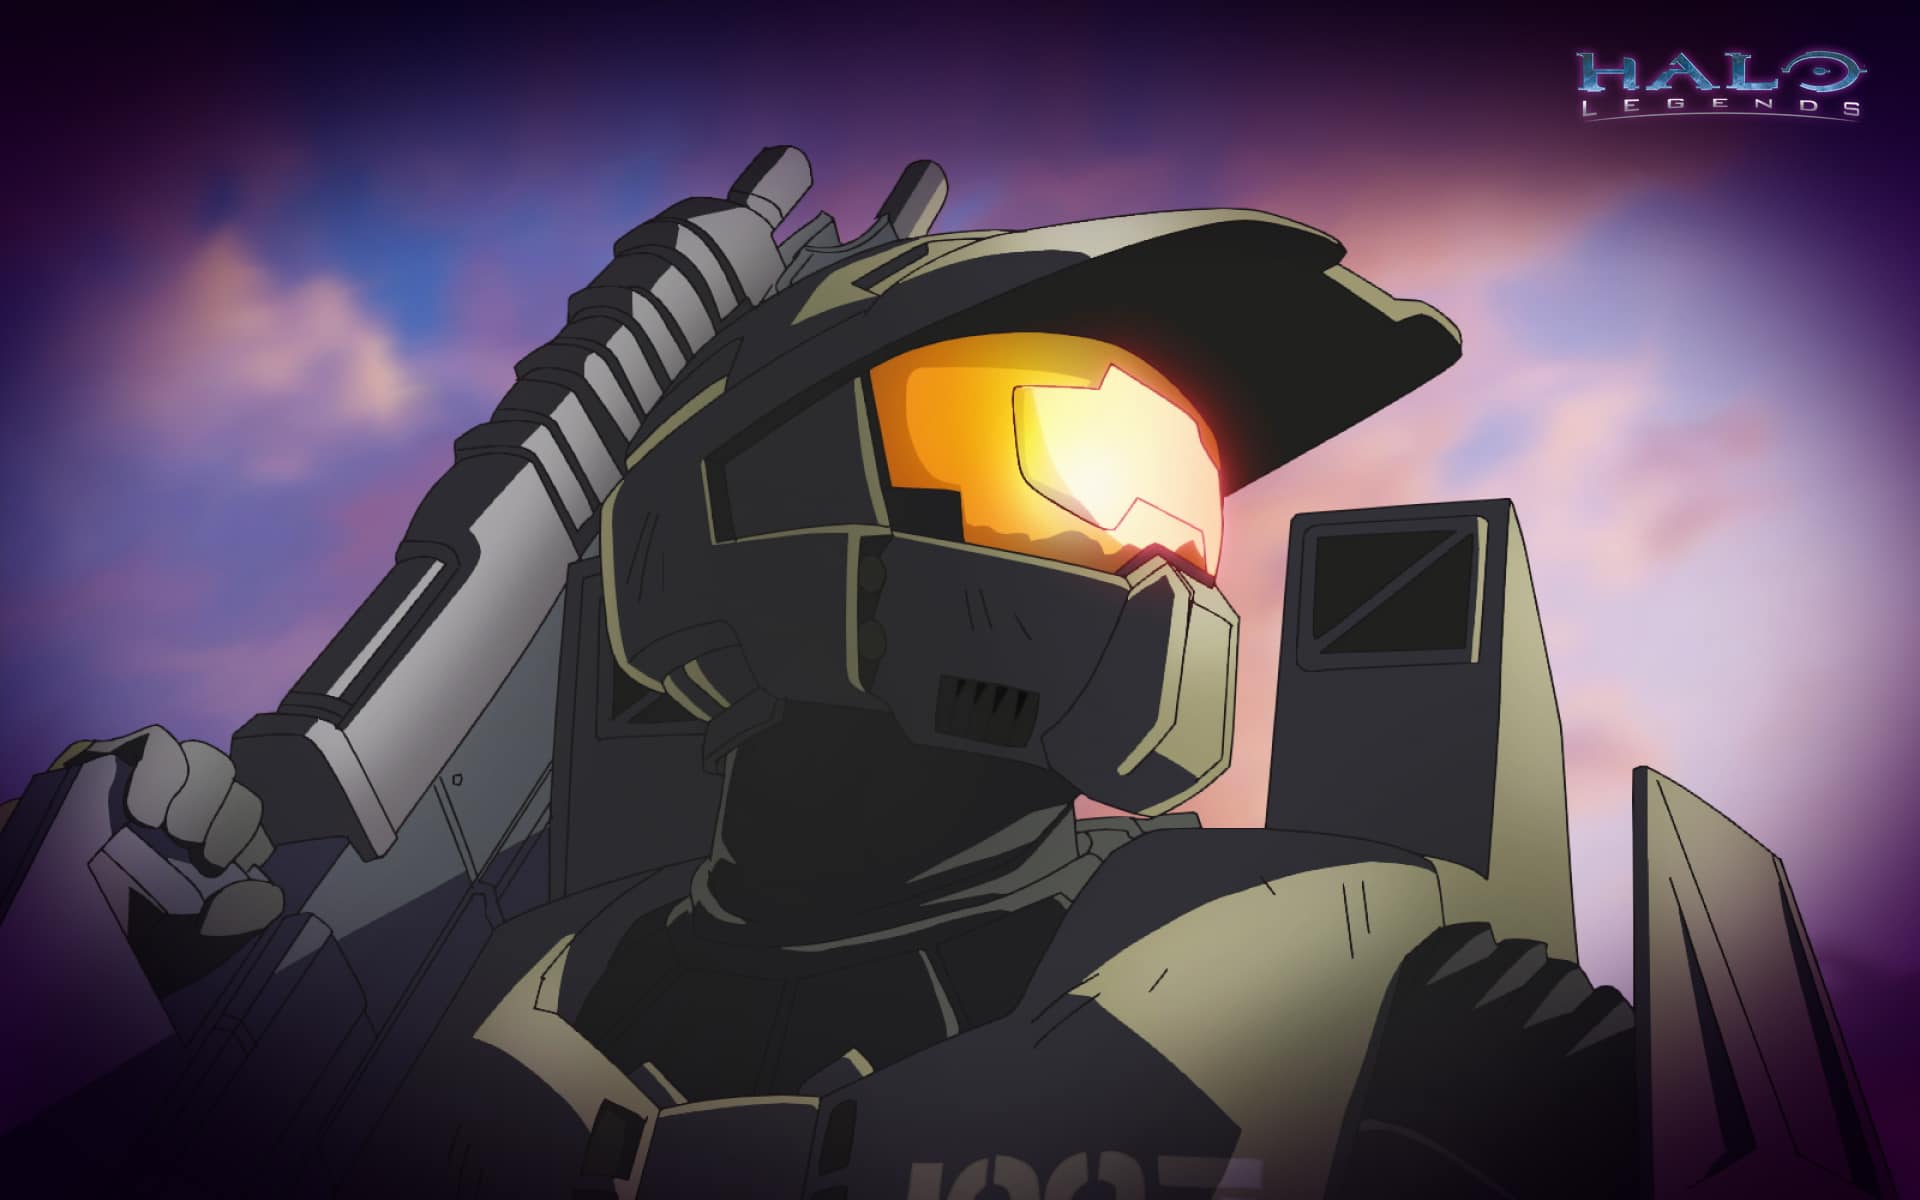 Halo Legends is an upcoming collection of seven anime short films all based 